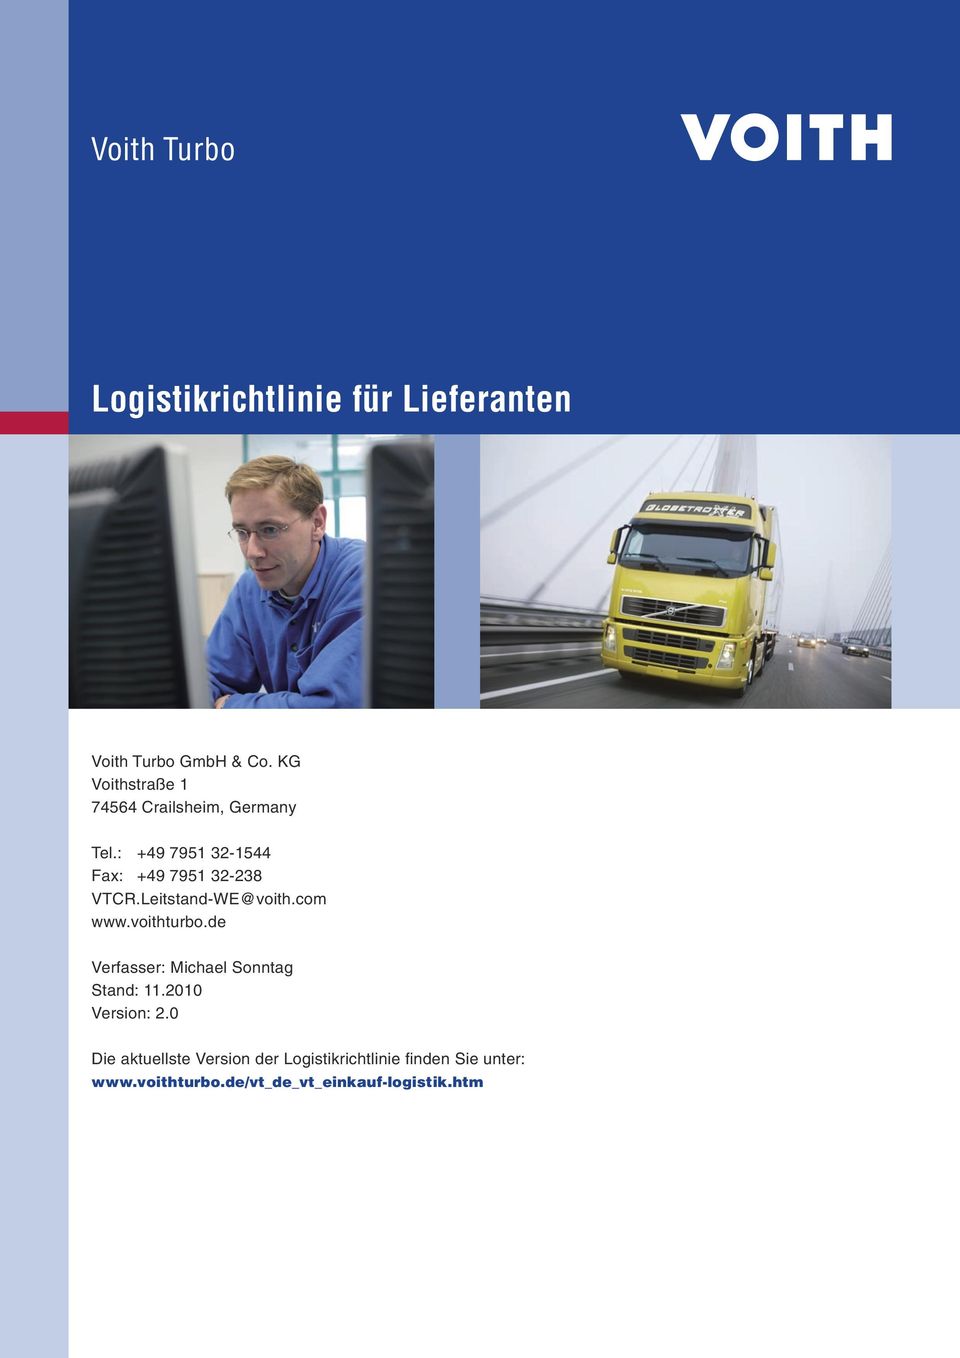 : +49 7951 32-1544 Fax: +49 7951 32-238 VTCR.Leitstand-WE@voith.com www.voithturbo.